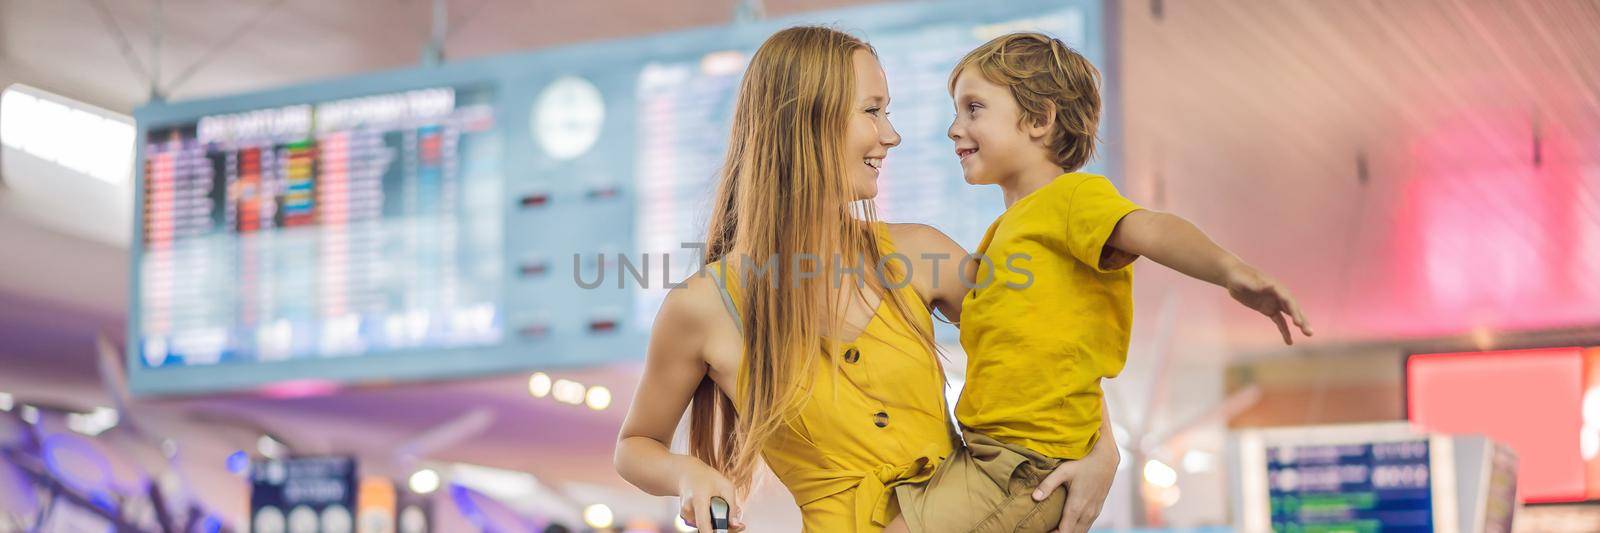 Family at airport before flight. Mother and son waiting to board at departure gate of modern international terminal. Traveling and flying with children. Mom with kid boarding airplane. yellow family look. BANNER, LONG FORMAT